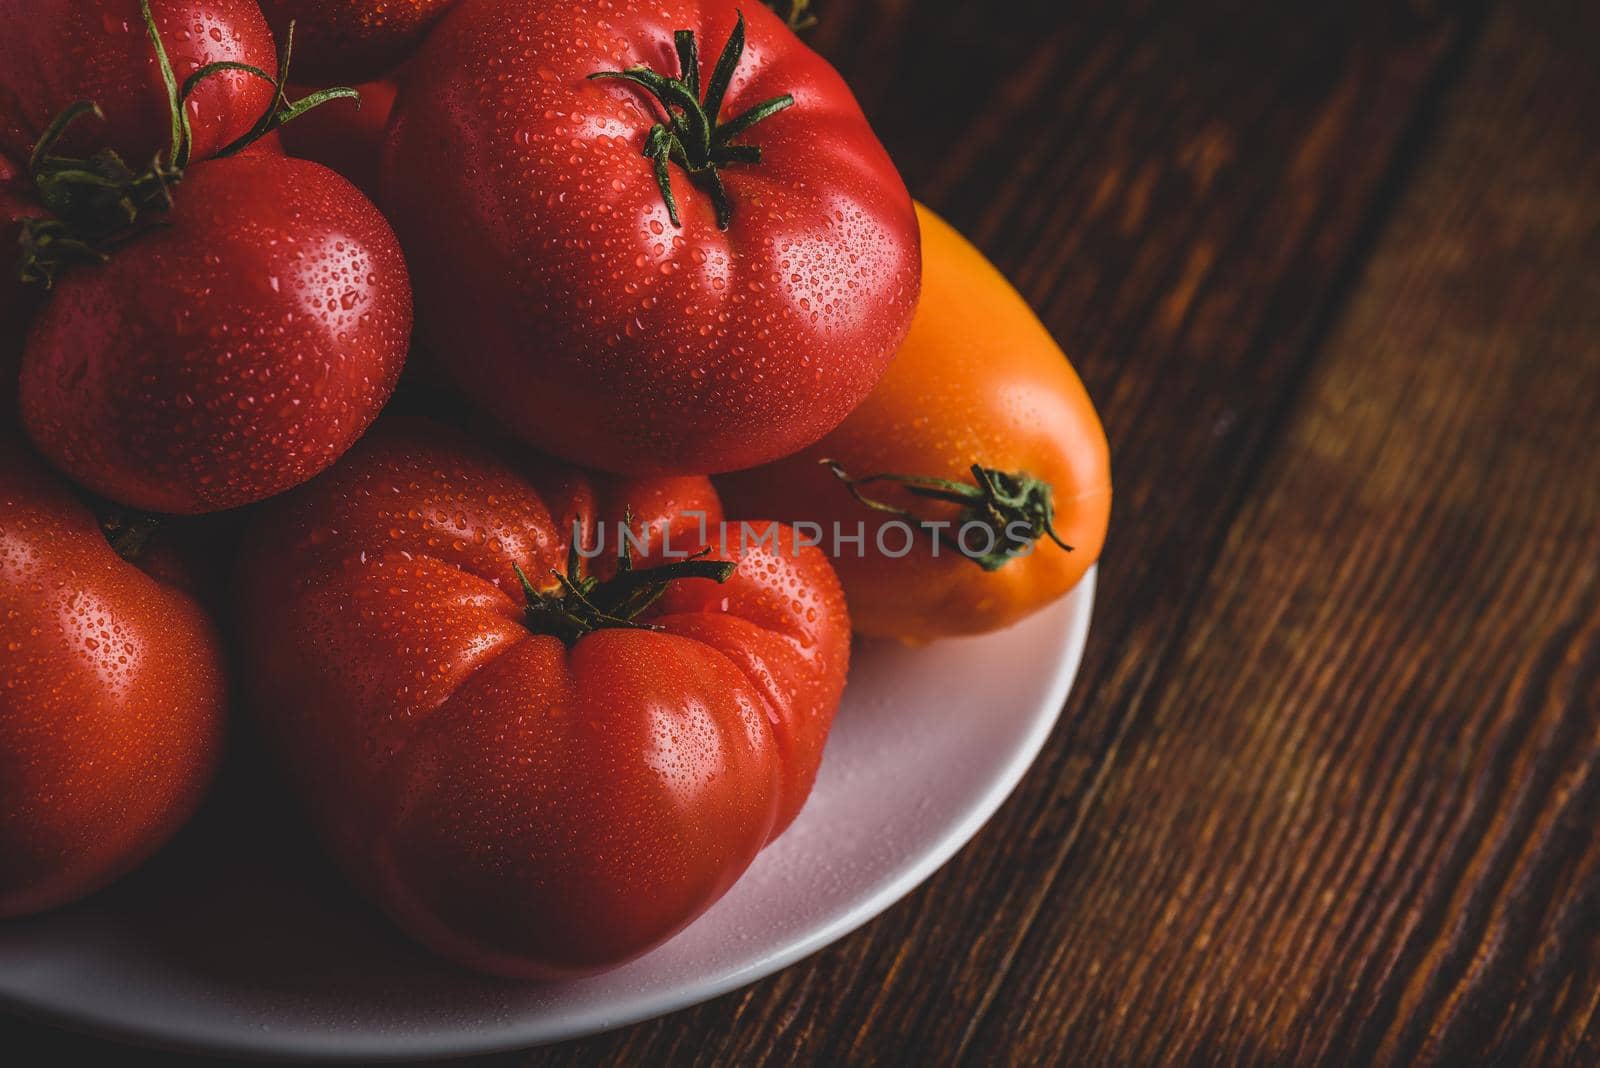 Fresh red and yellow tomatoes on white plate over wooden surface